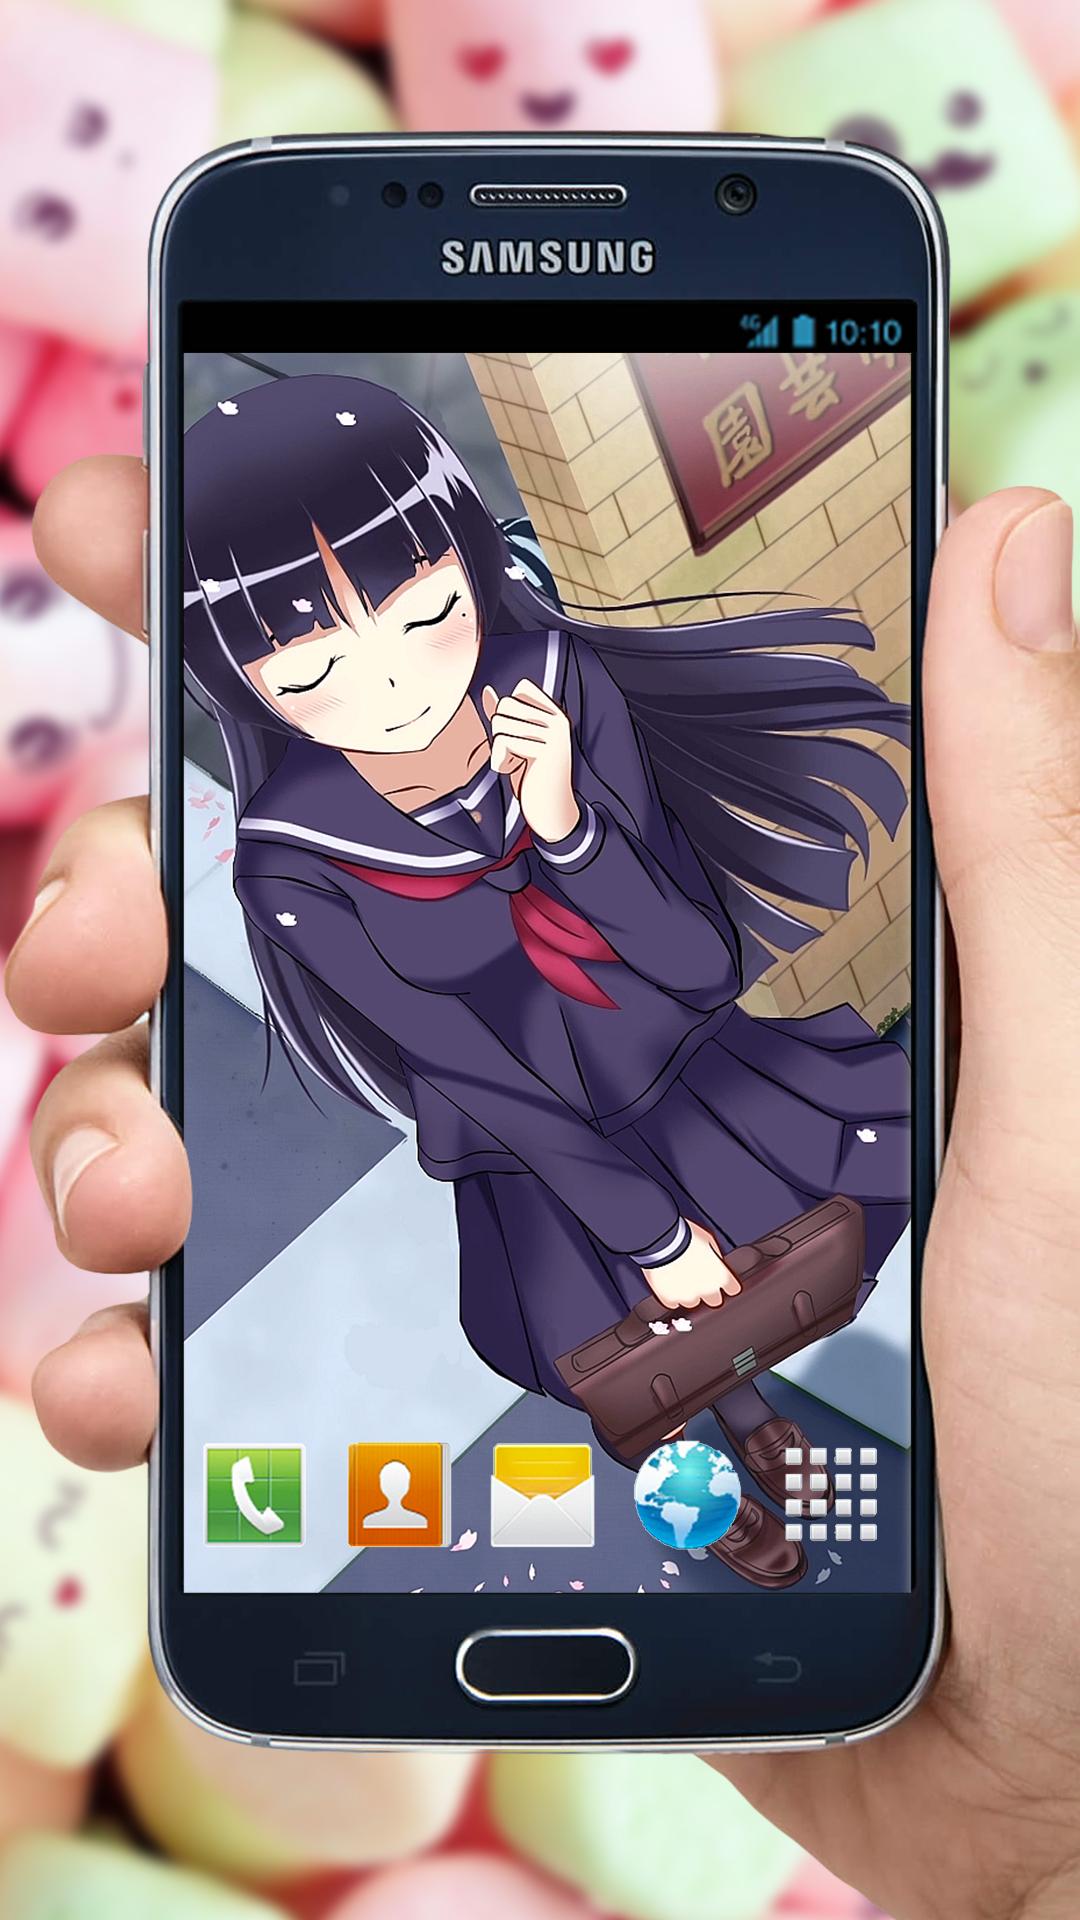 Fan Anime Live Wallpaper Of Ruri Gokou 五更 瑠璃 For Android Apk Download